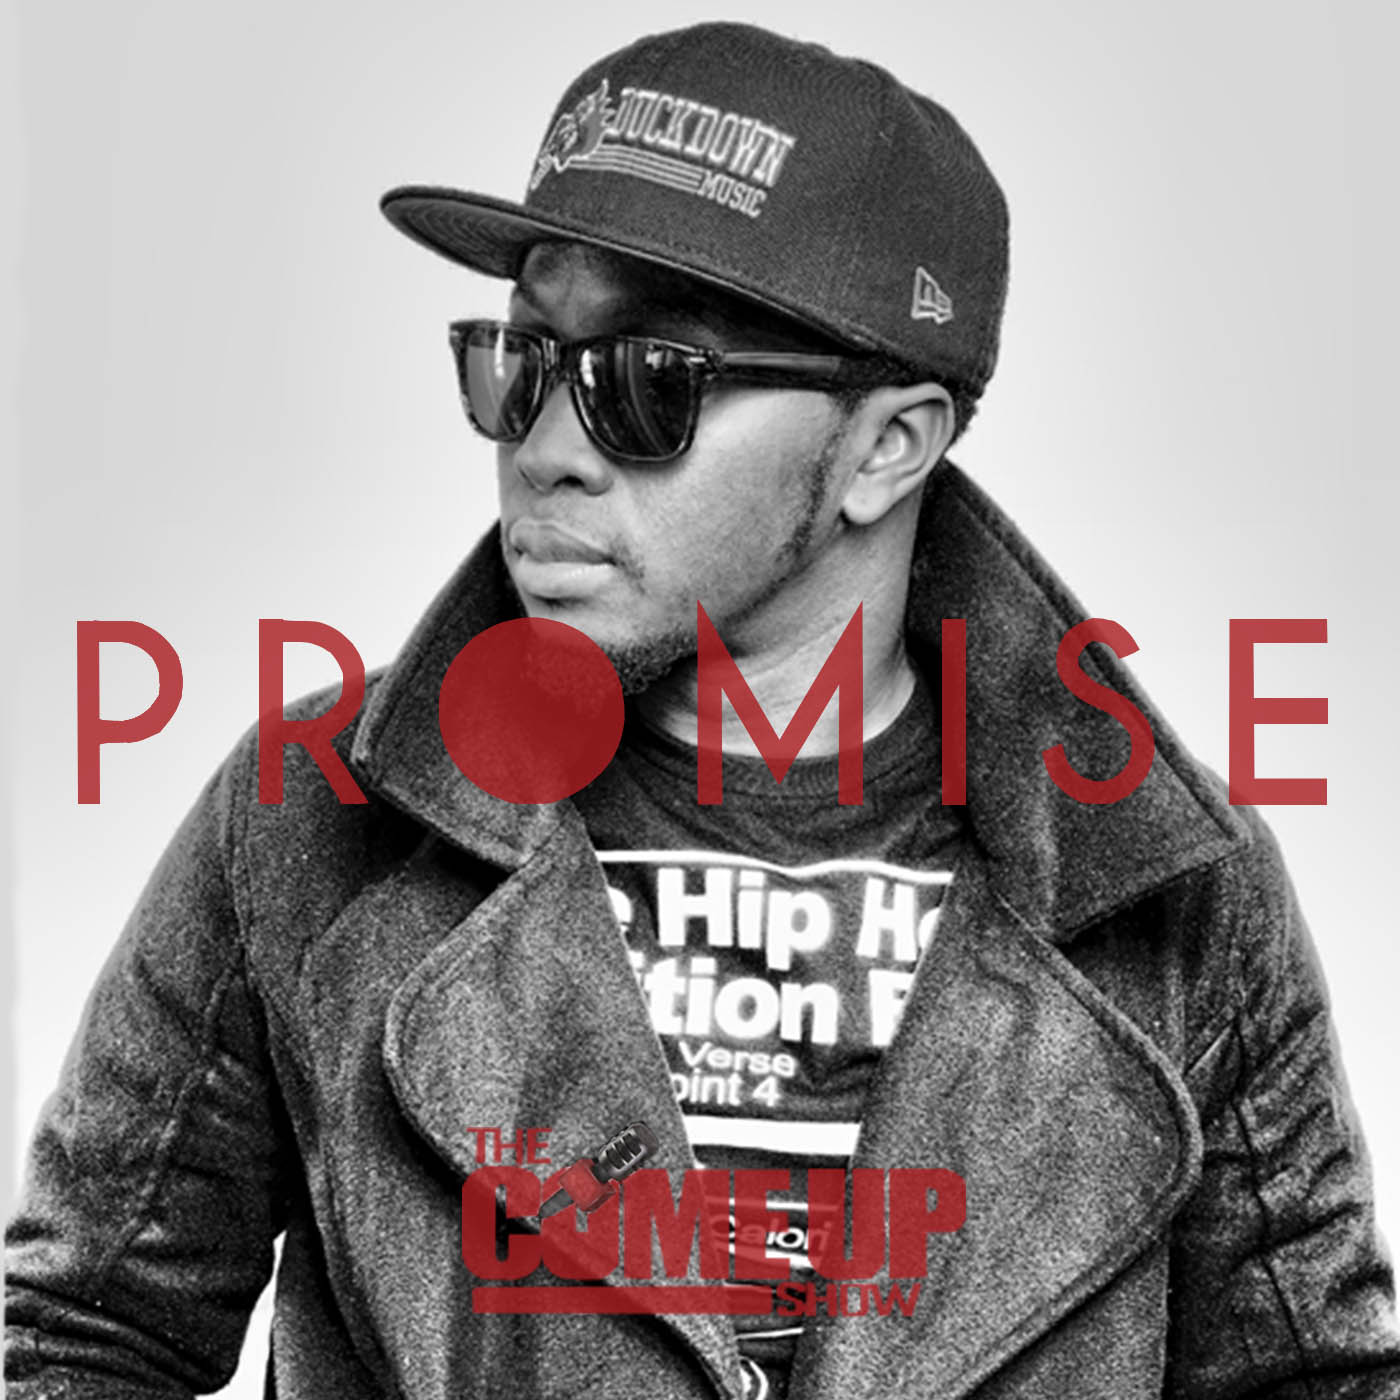 Thumbnail for "Promise talks upcoming album, pursuing goals, and coming up alongside Drake".